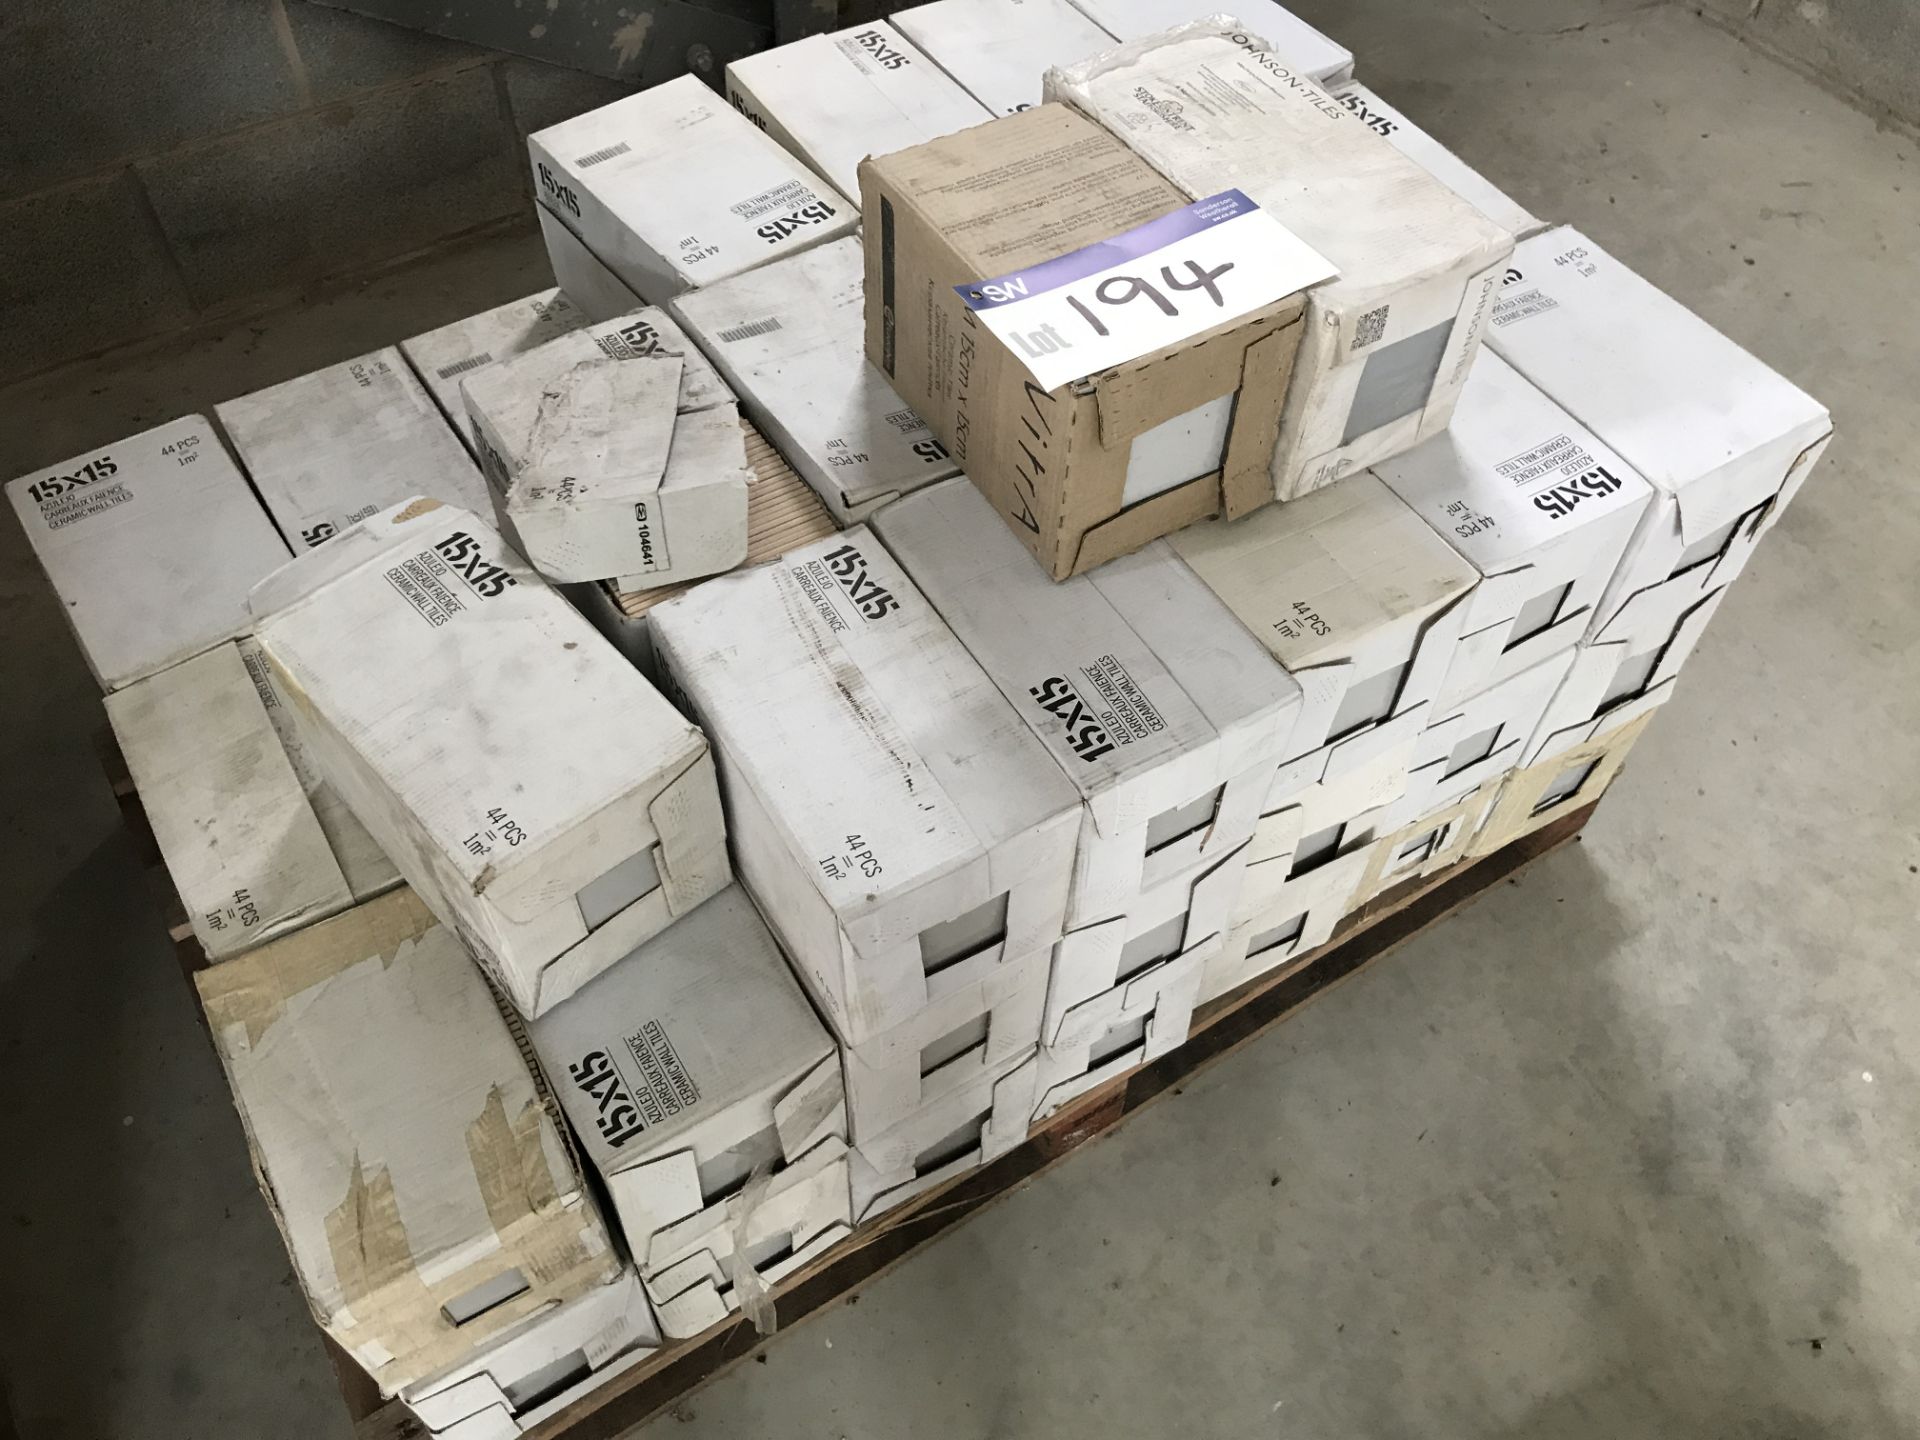 Quantity of 15 x 15 Ceramic Wall Tiles, as set out on pallet